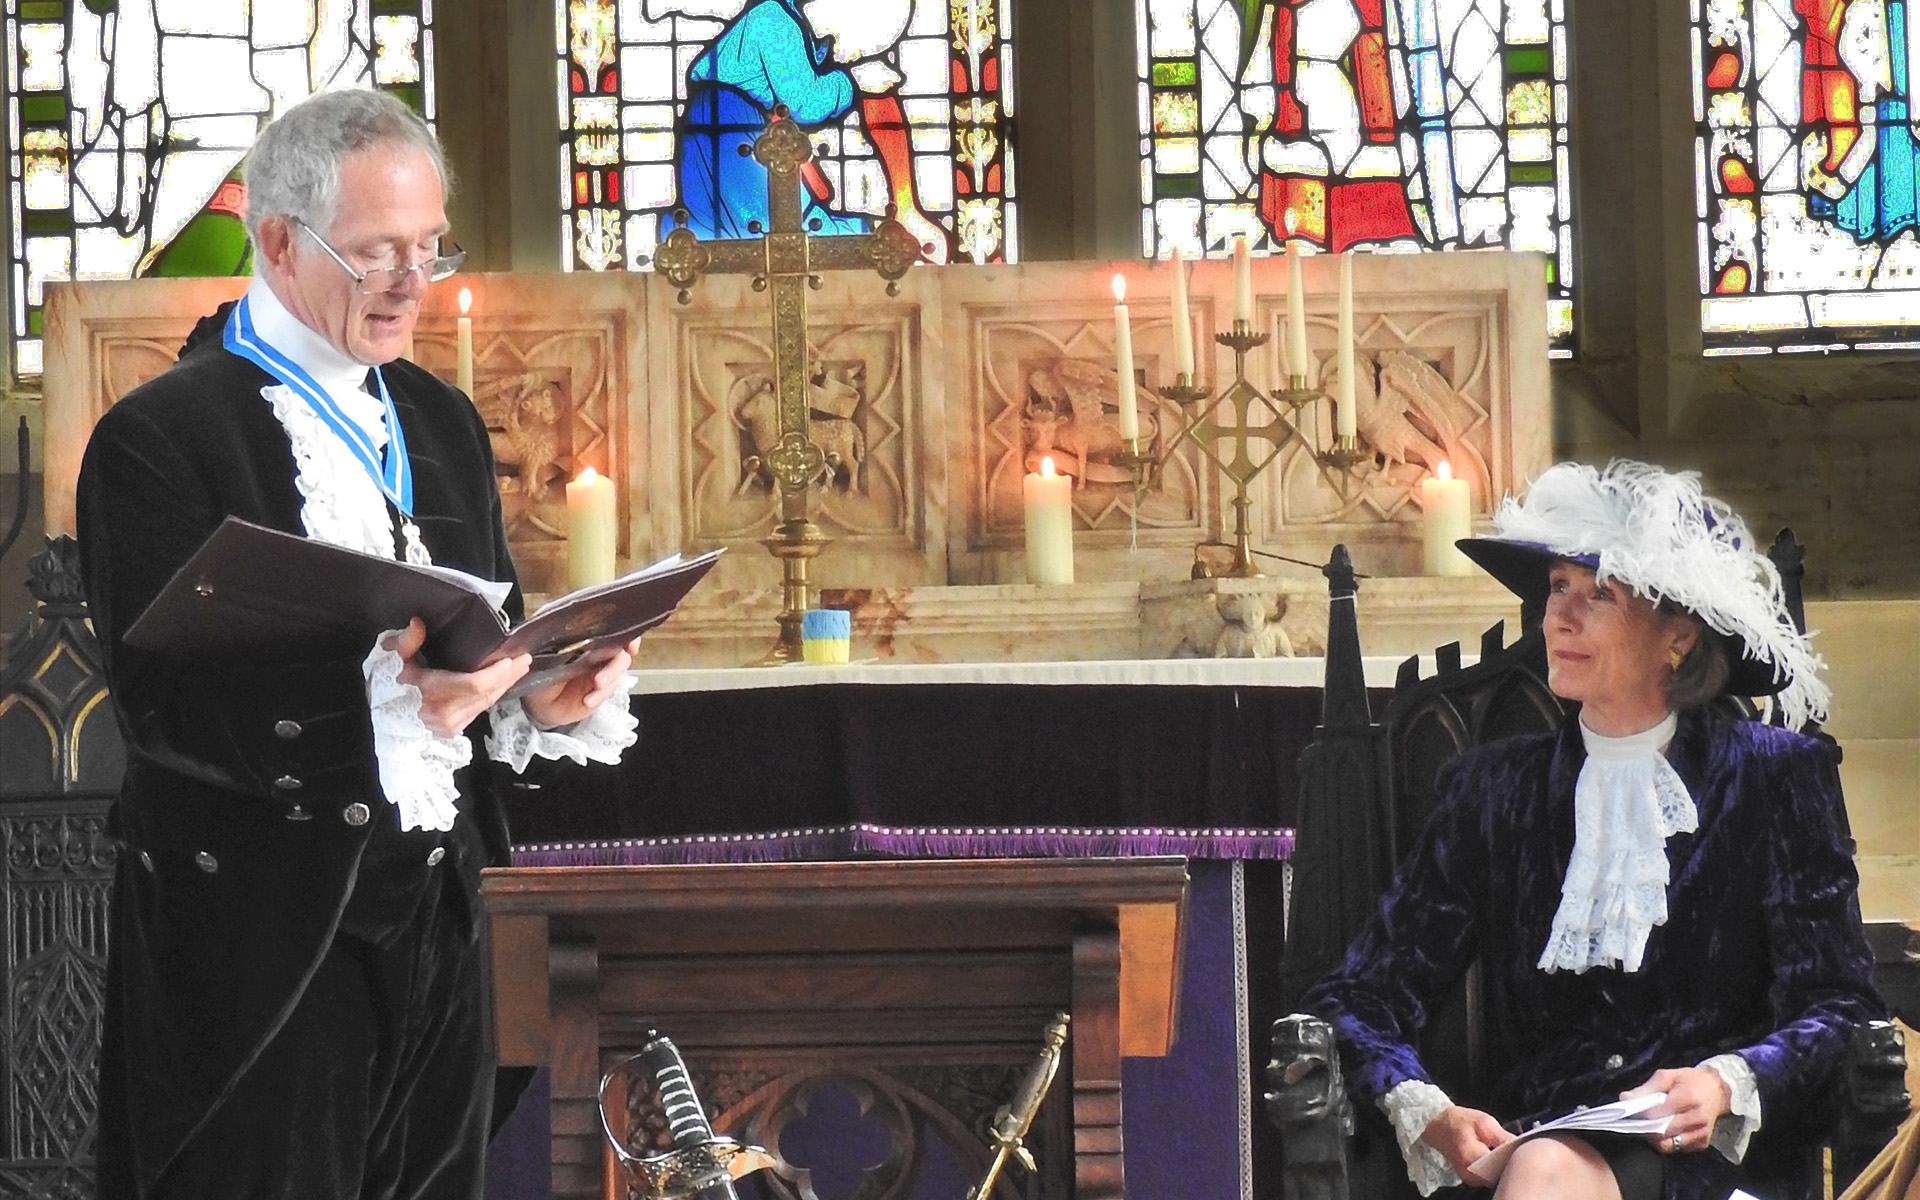 Inauguration of a New High Sheriff 2022 Featured Image